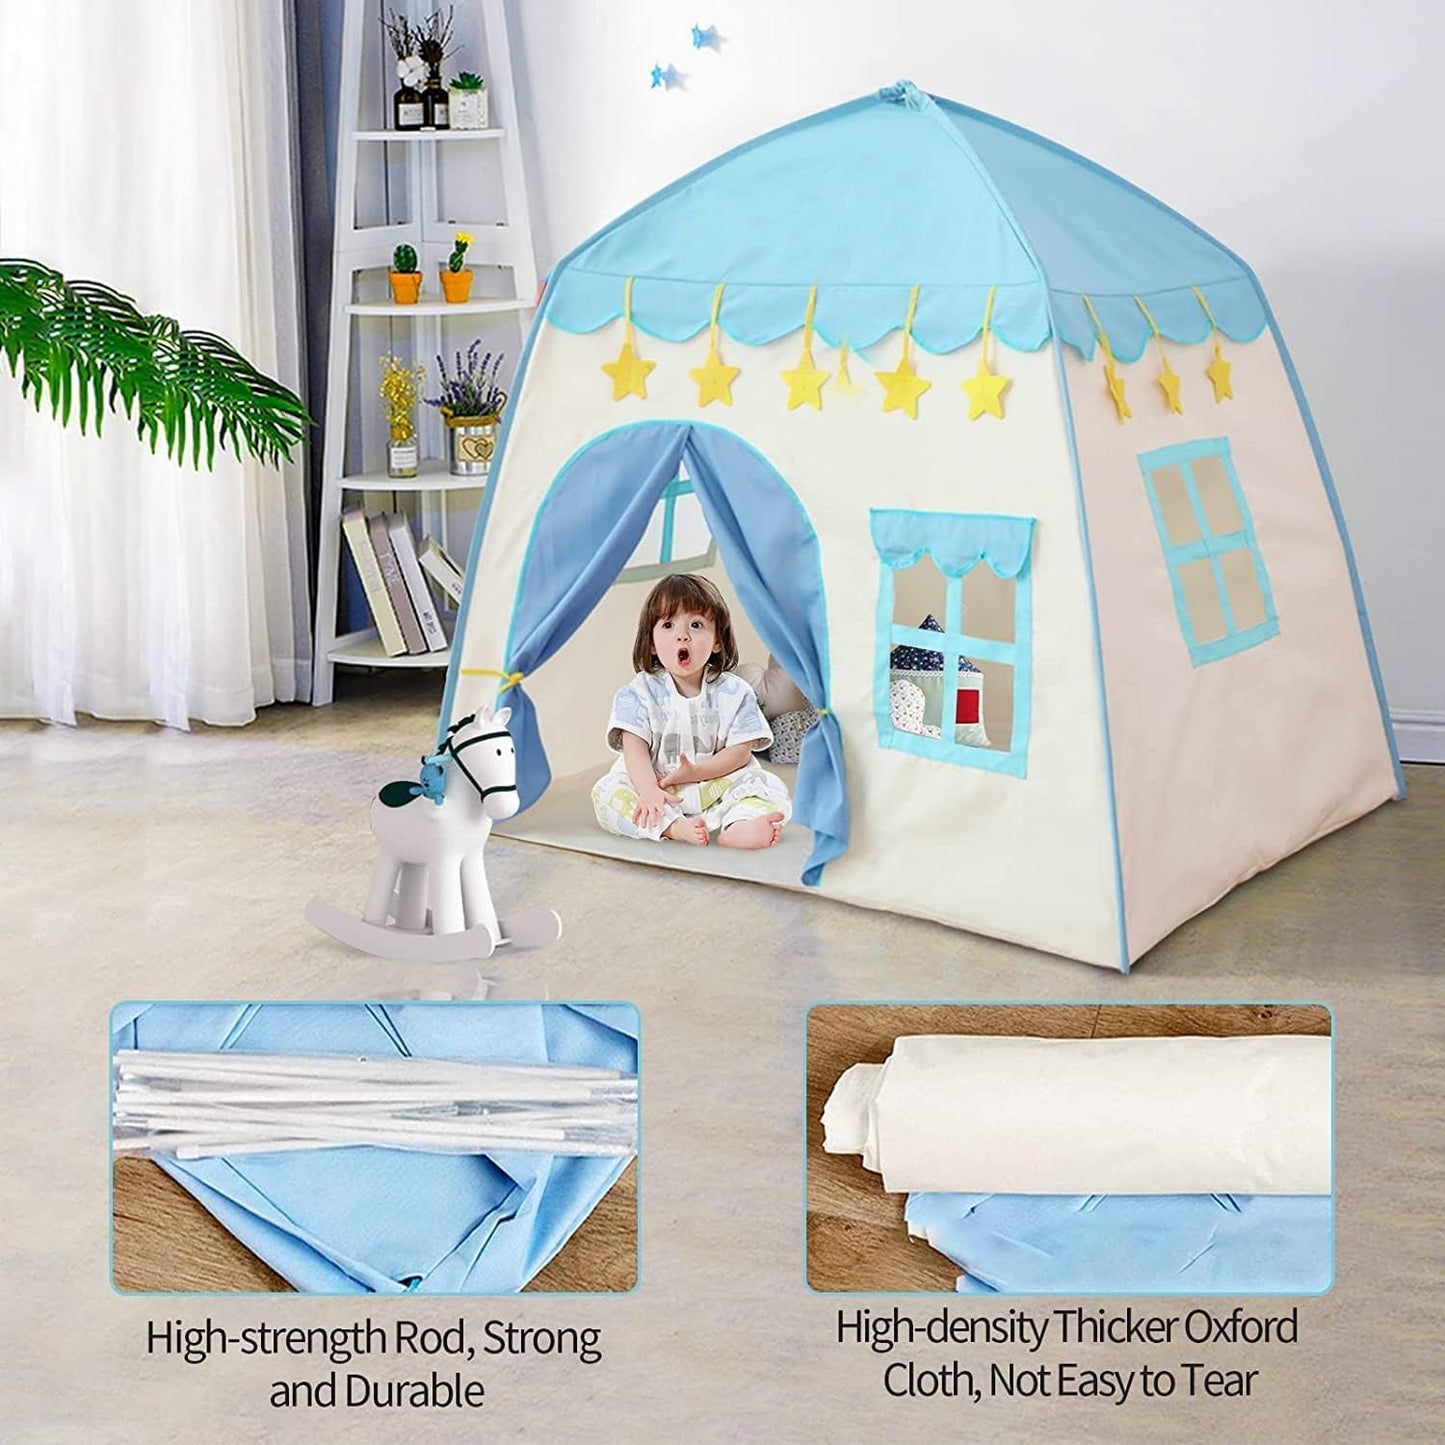 2023 KUSARKO Castle Play Tent for Kids, Playhouse Tent for Girls & Boys-Indoor and Outdoor Play Tent for Kids, Imaginative Gift for Toddlers & Children 3+ Years Old (Light blue)